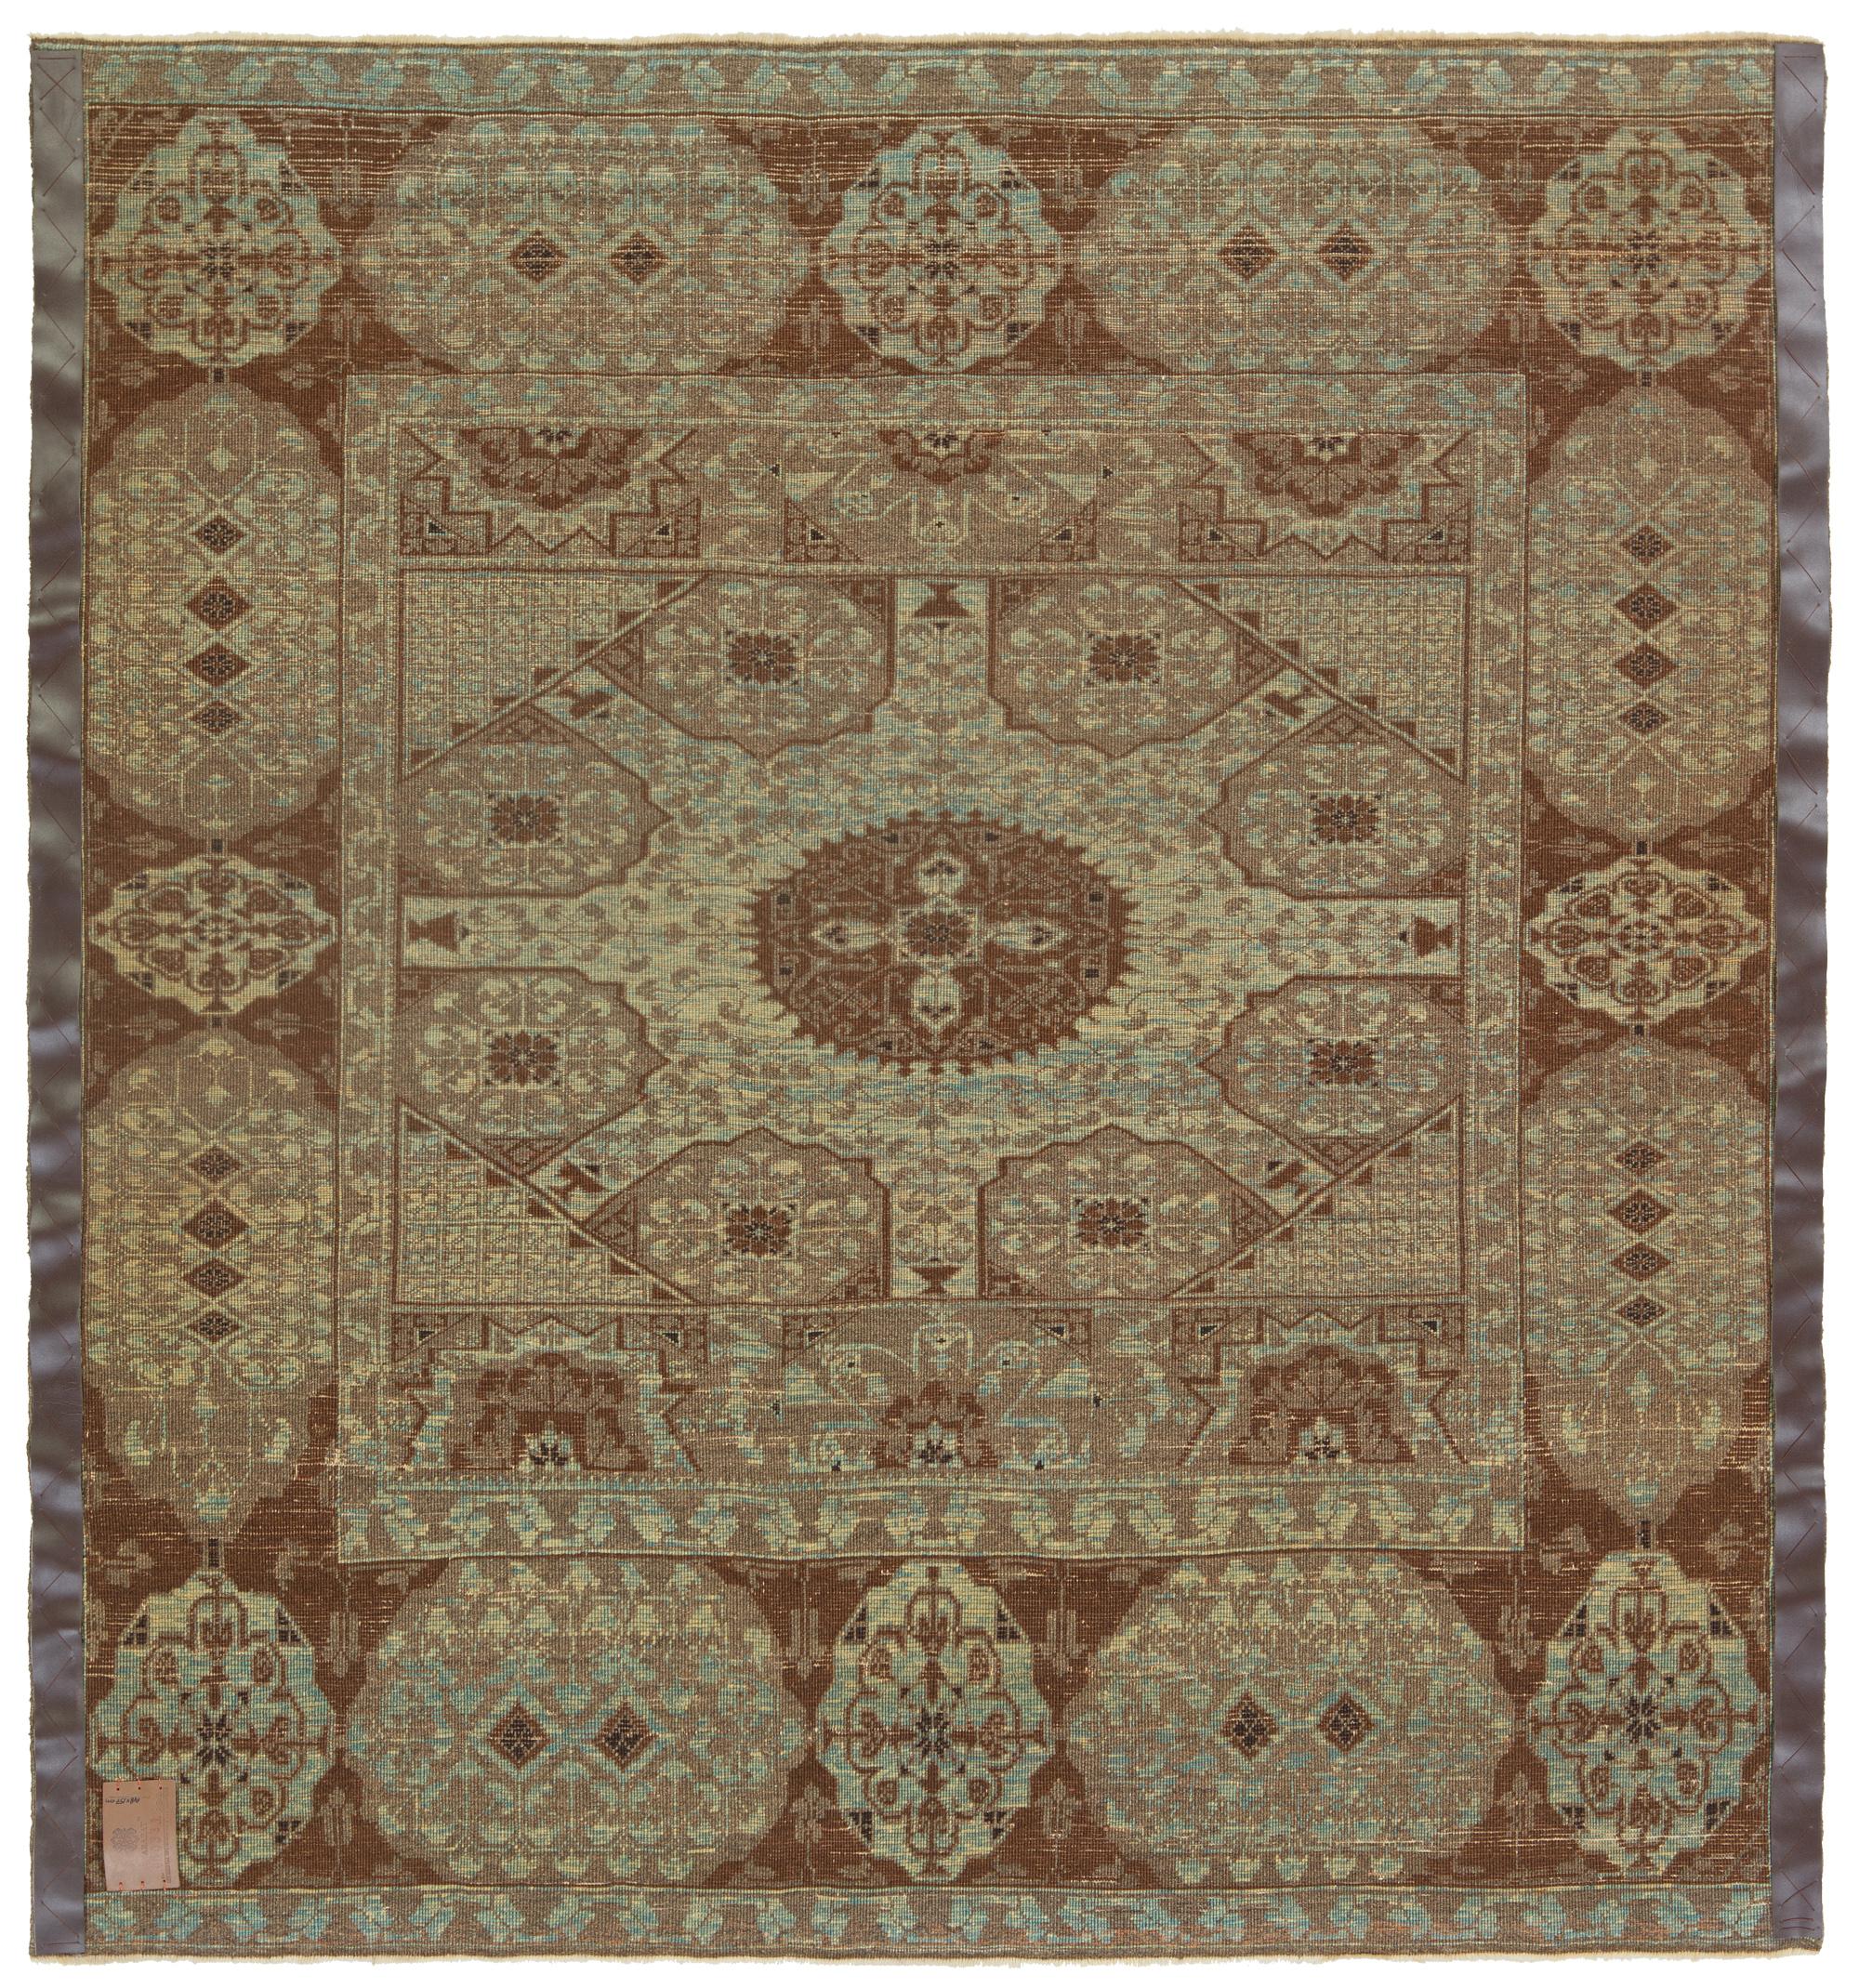 The source of the rug comes from the book Renaissance of Islam, Art of the Mamluks, Esin Atil, Smithsonian Institution Press, Washington D.C., 1981 nr.125. This a rug with a cup motif design late 15th-century rug from Mamluk Sultane of Cairo, Egypt.